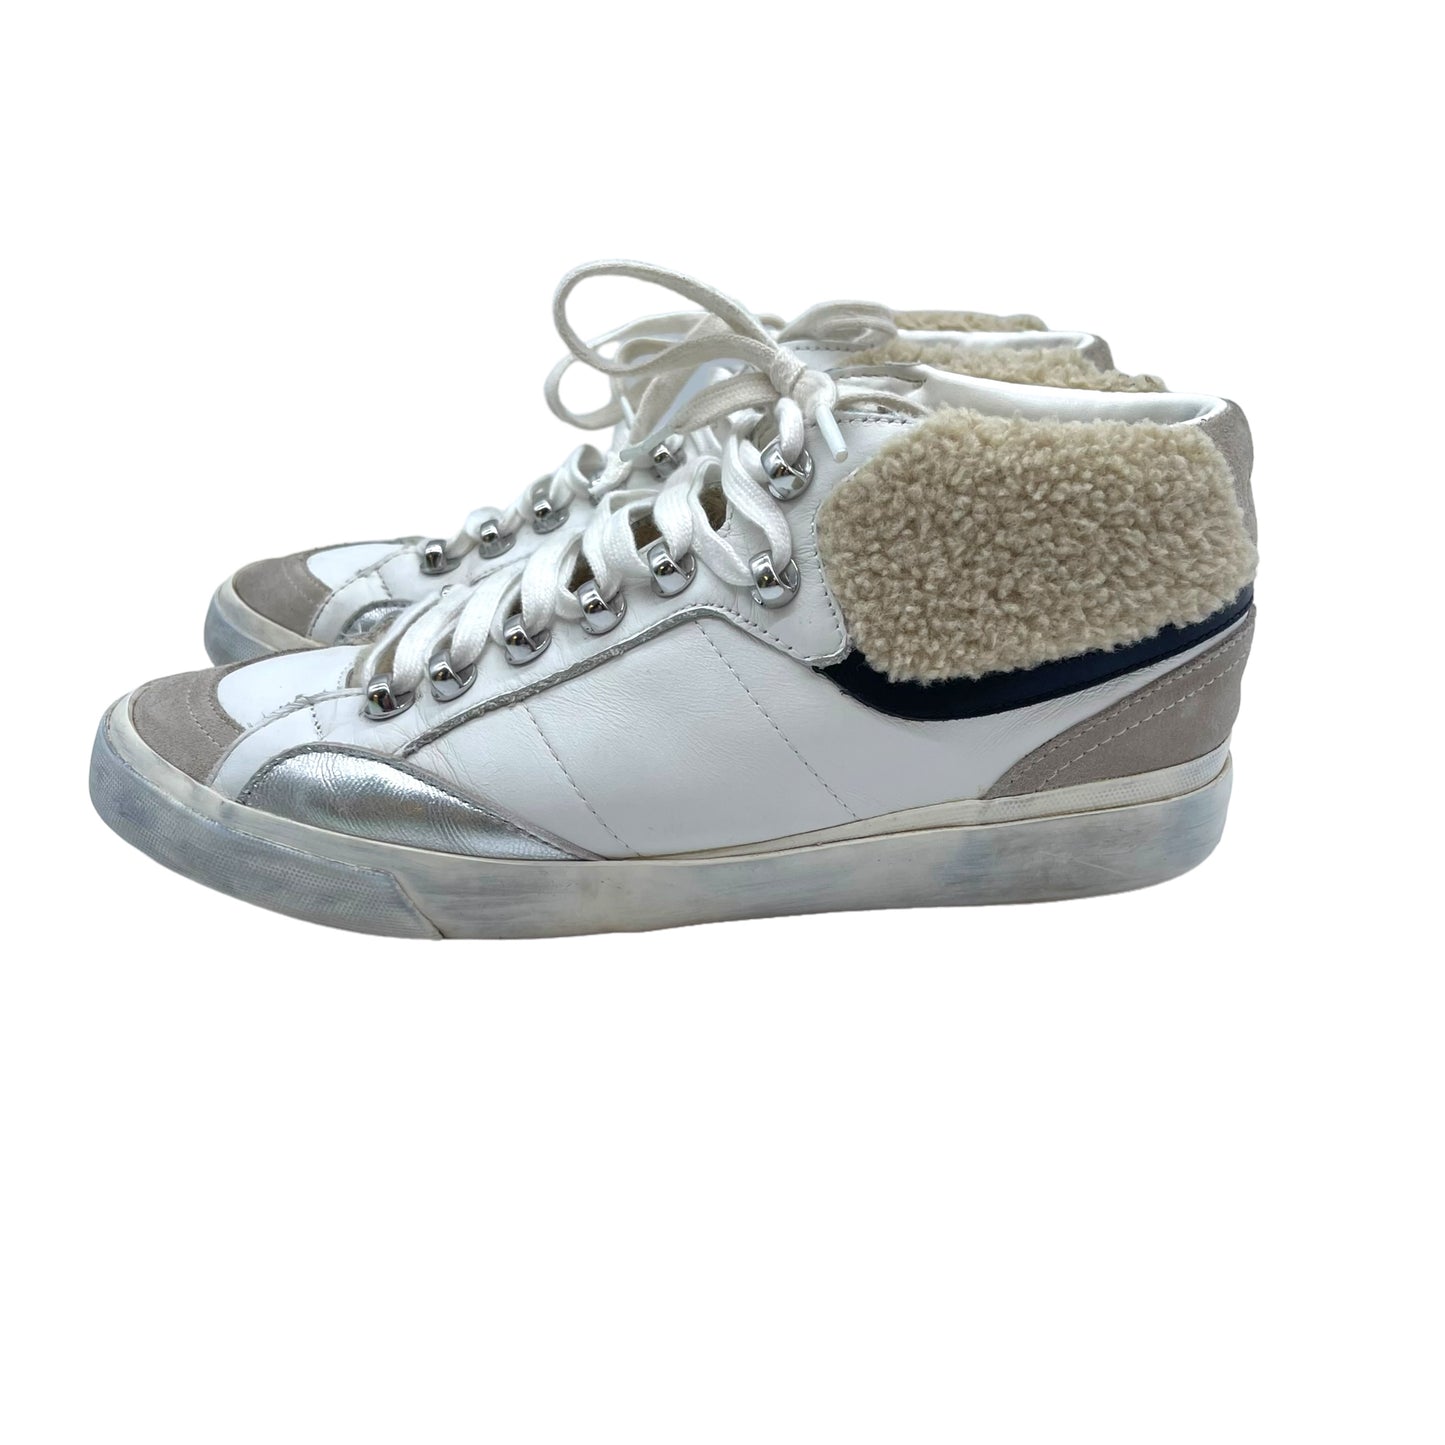 Shoes Sneakers By Marc Fisher  Size: 9